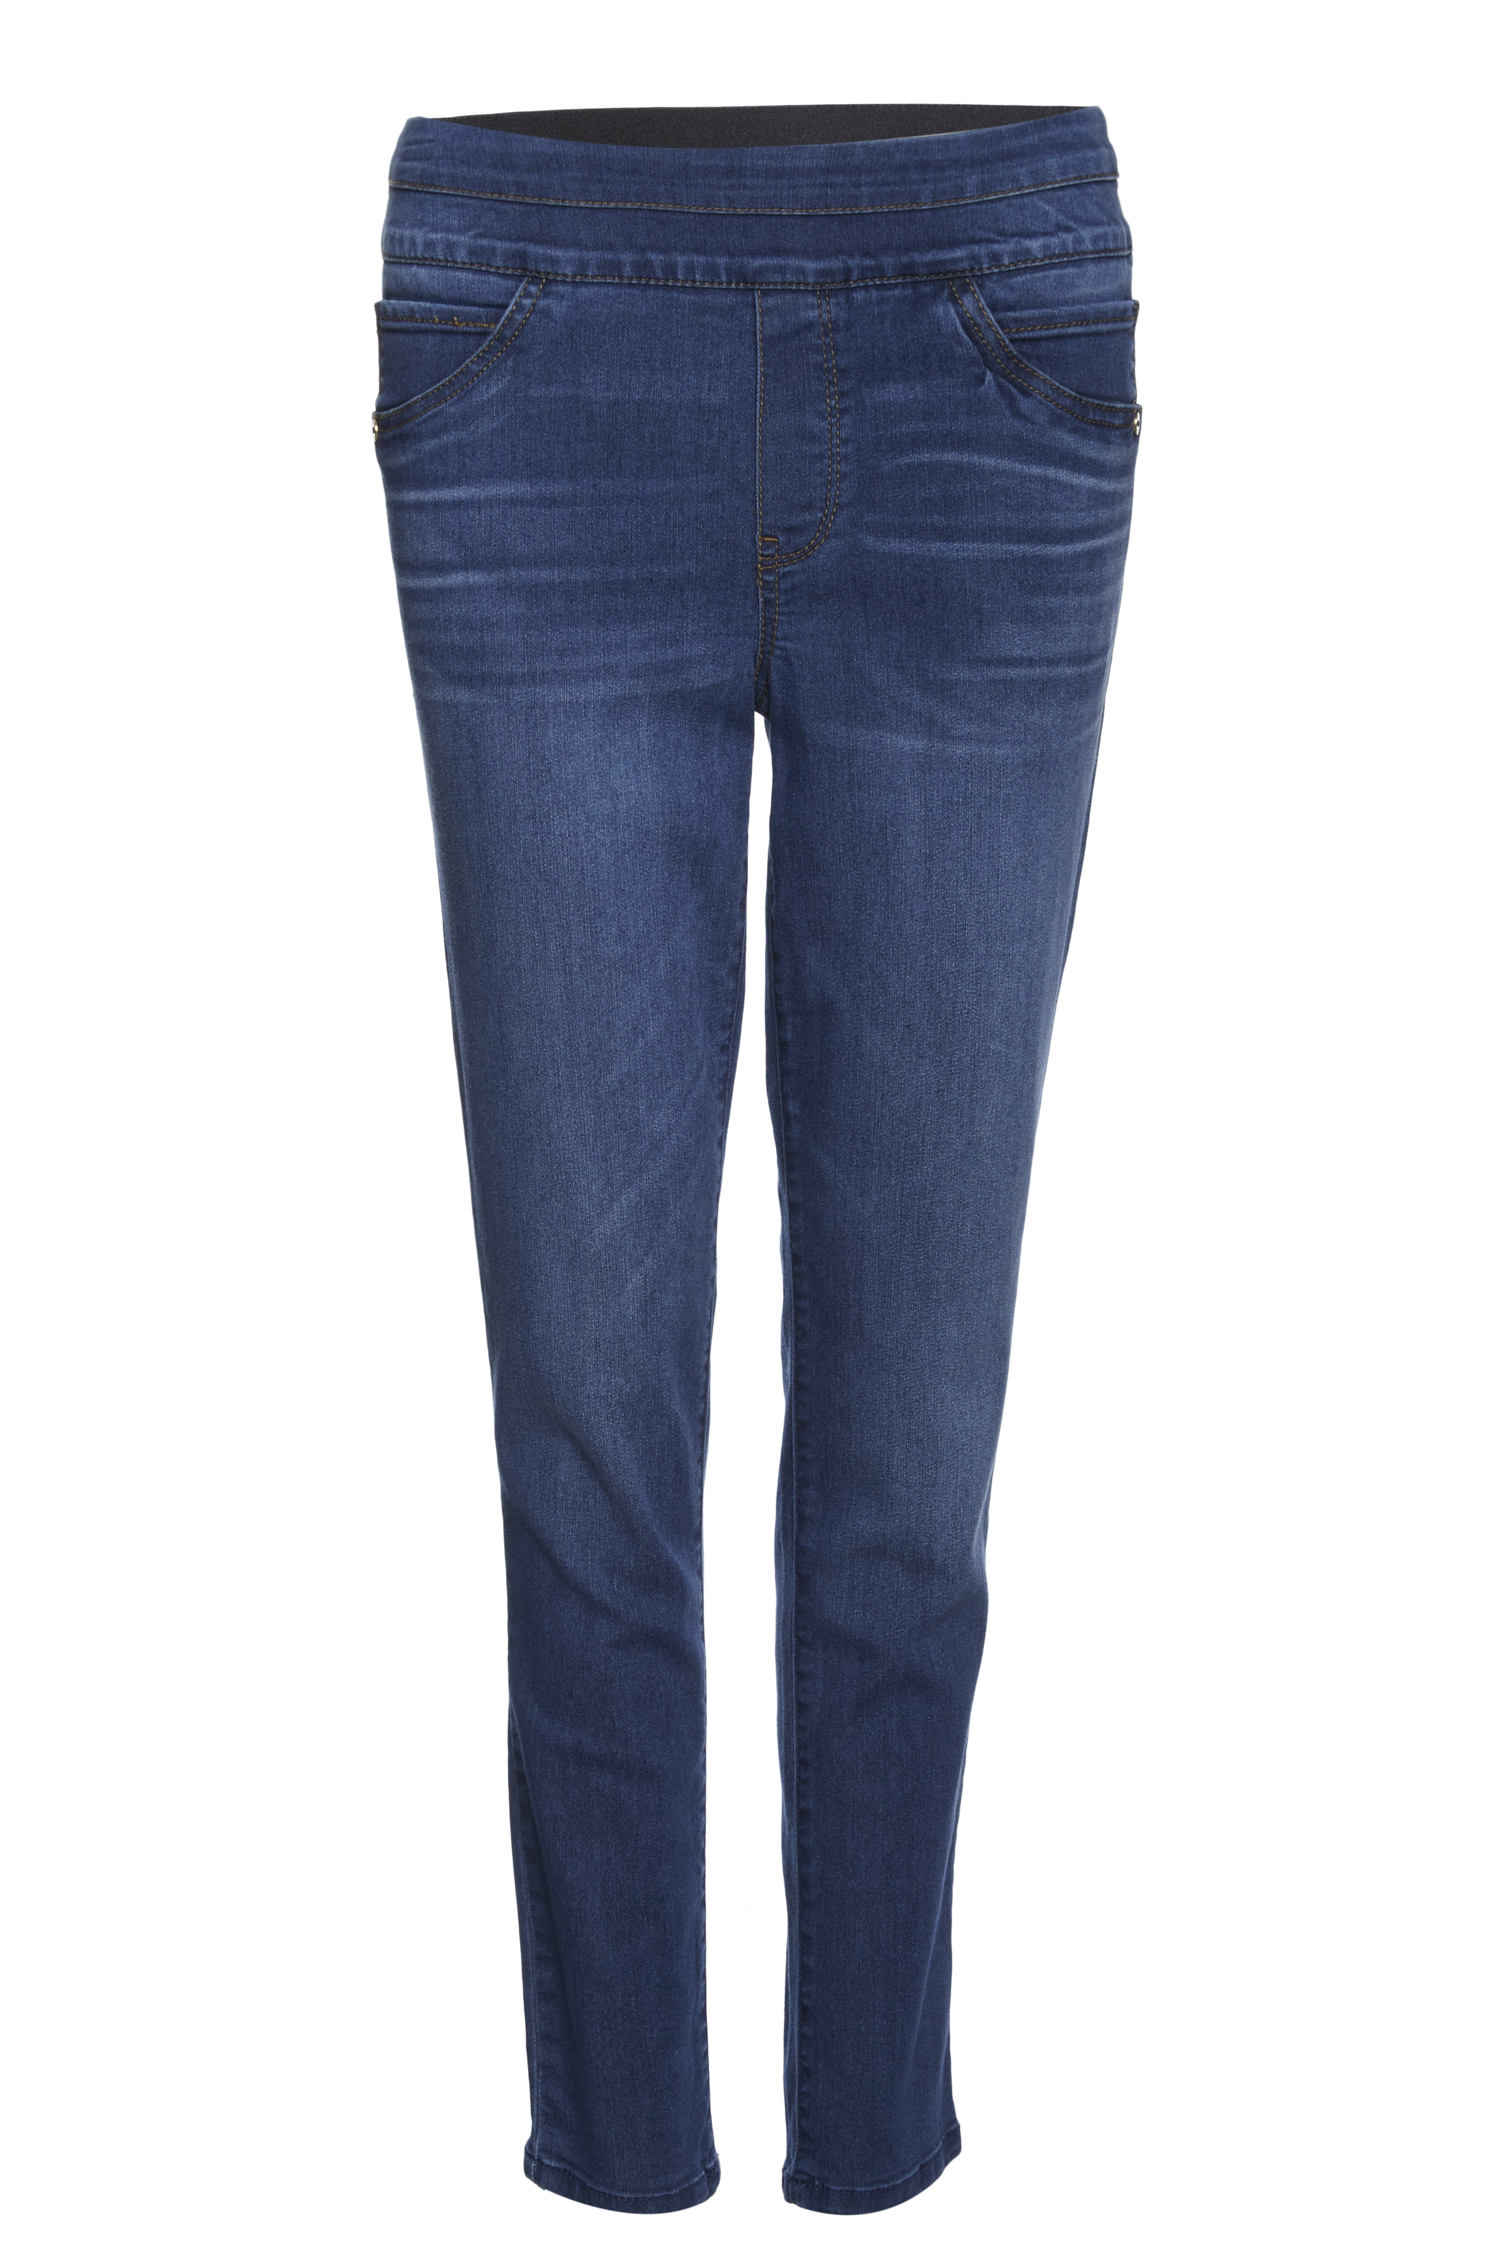 Democracy 'AB'solution High Rise Pull-On Jean